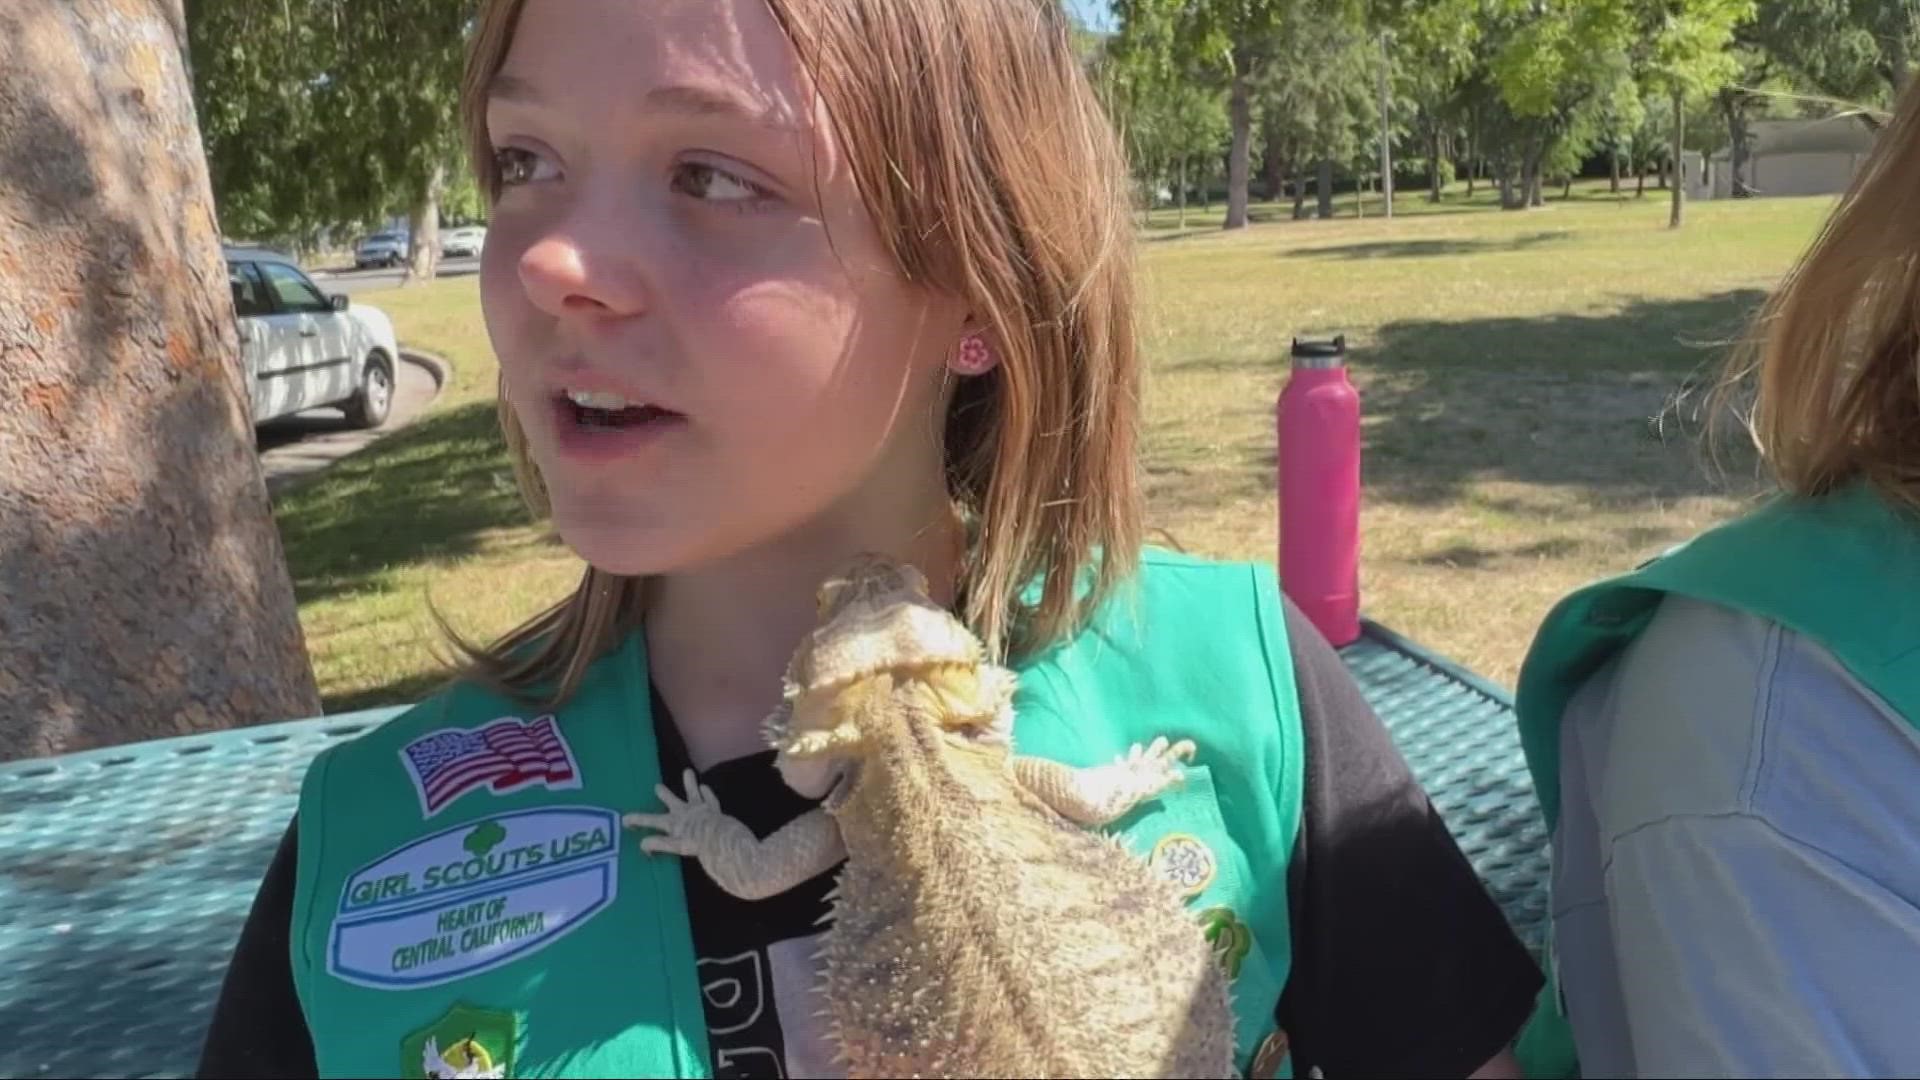 A local Girl Scout teamed up with rescue groups in the area to create an exotic pet rescue fair after she recognized the need for reptile and exotic pet rescue.